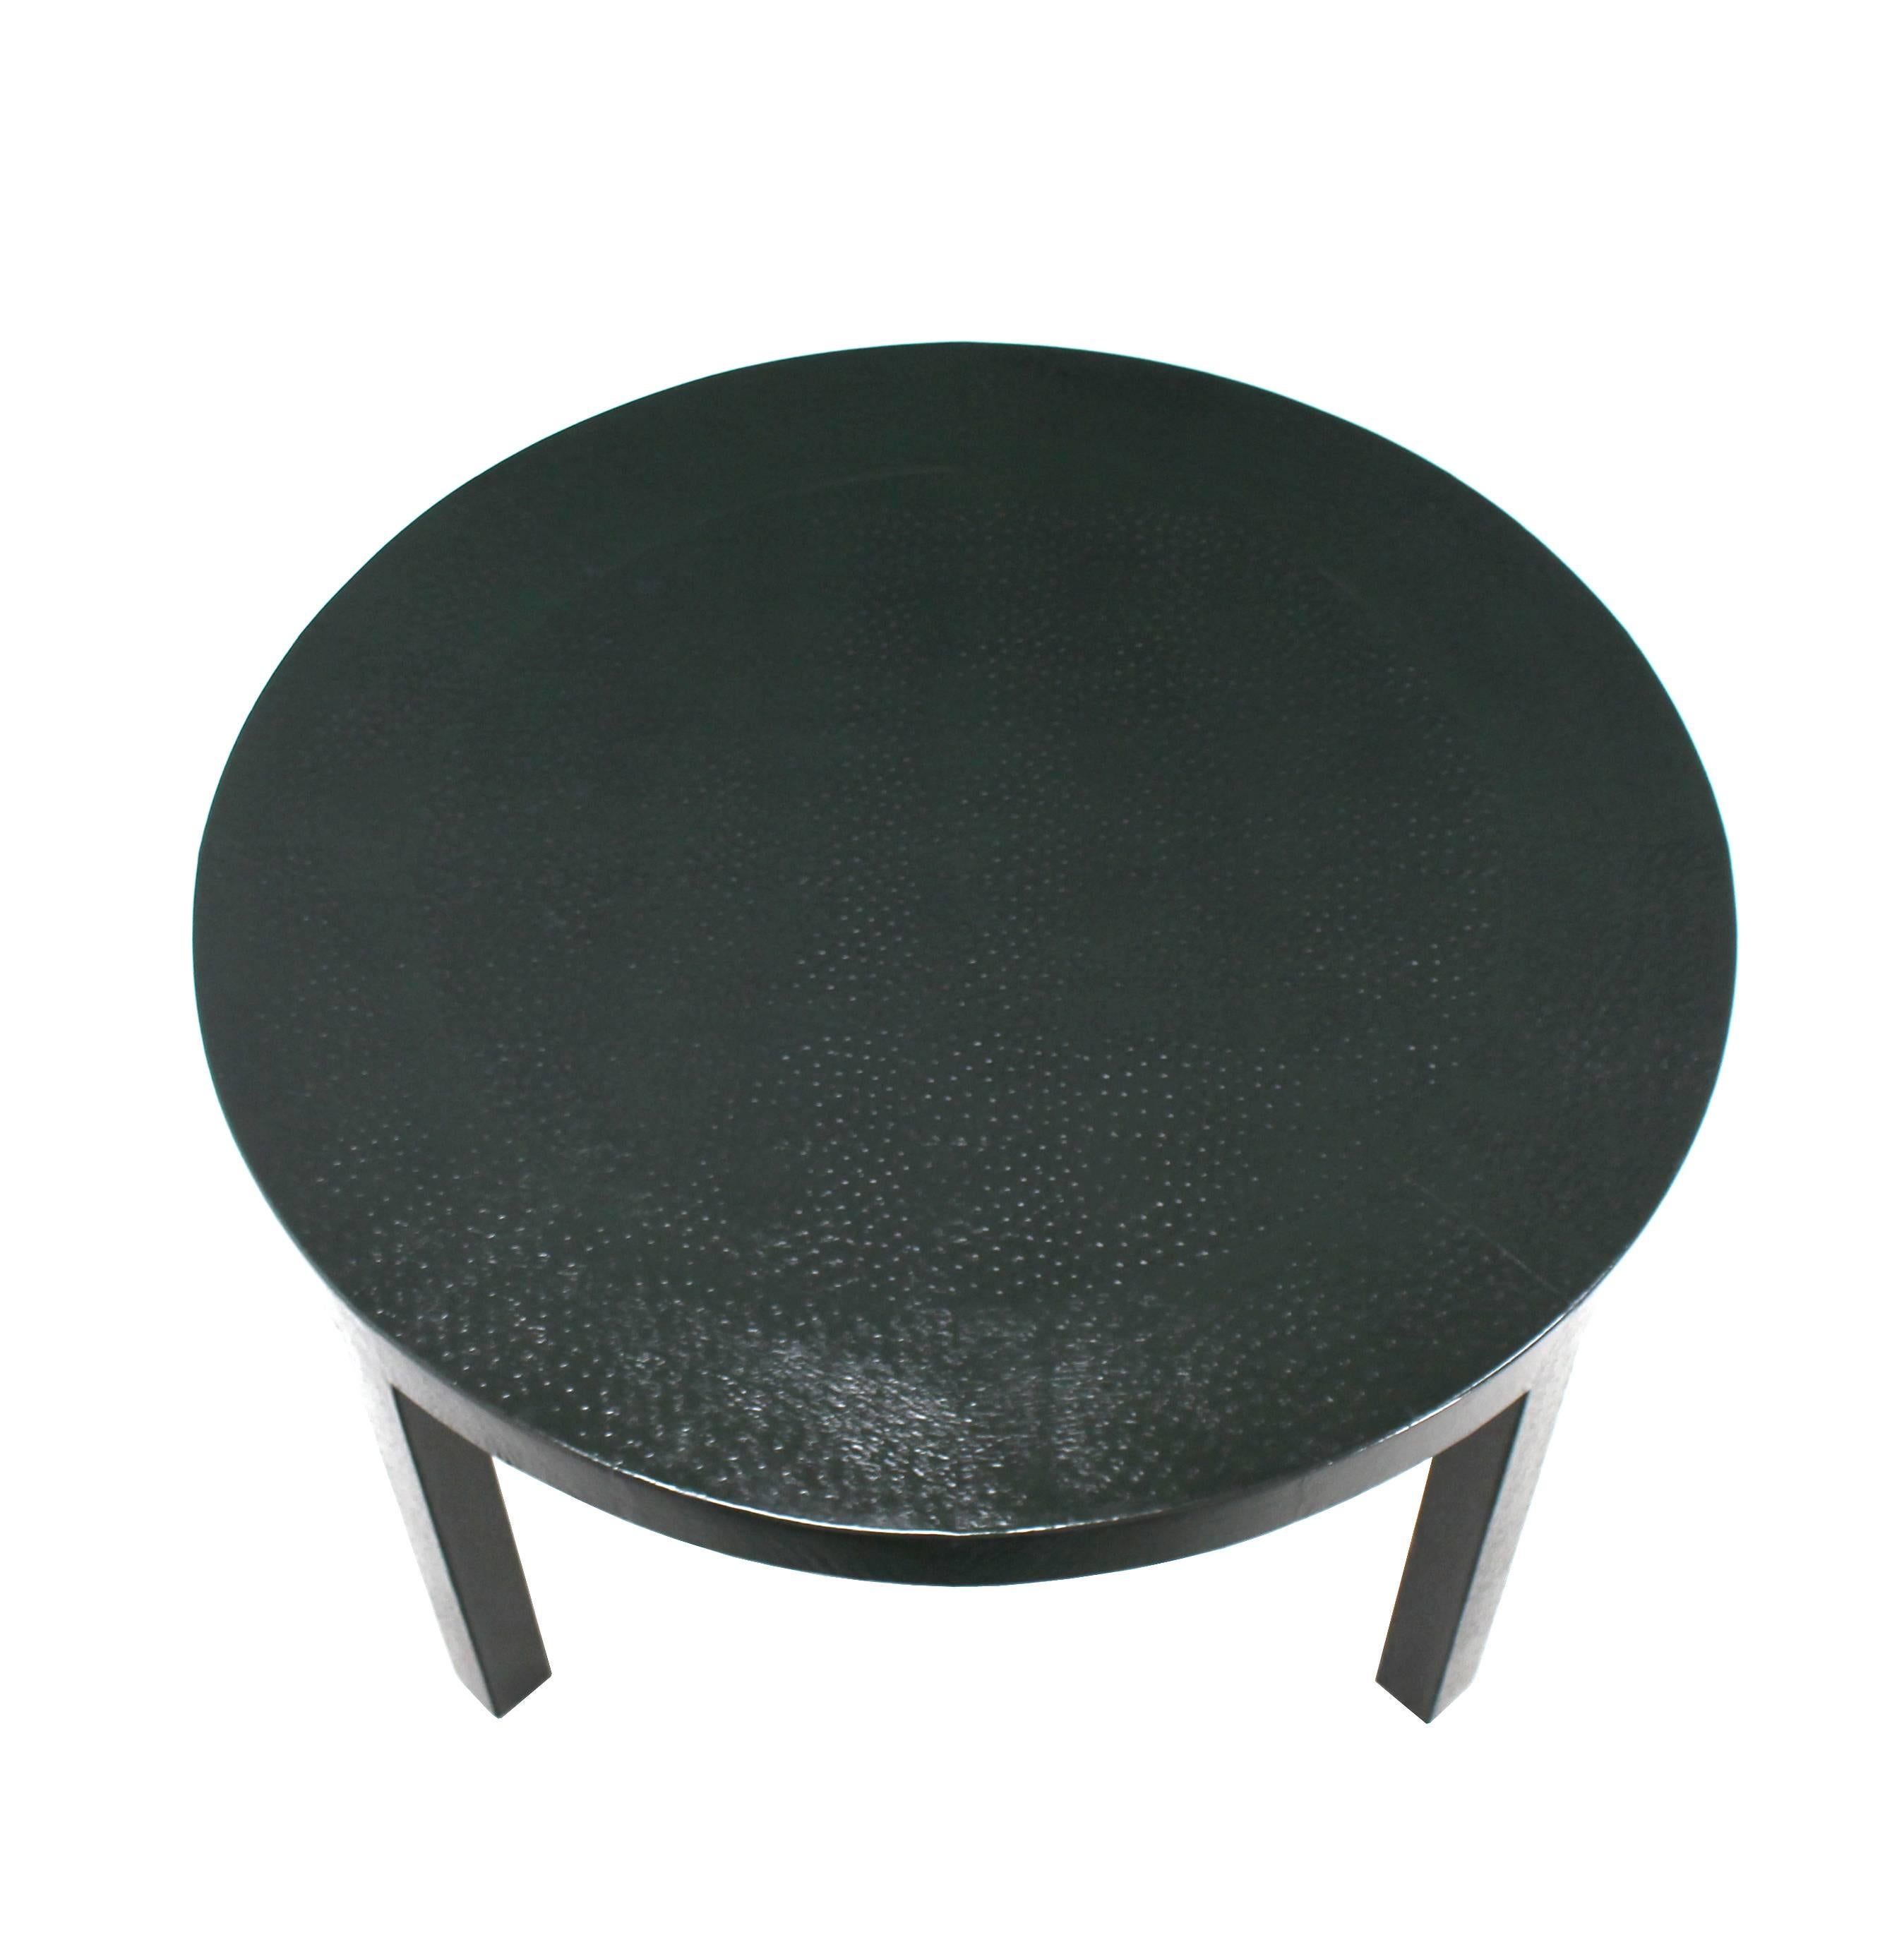 American Dark Olive Ostrich Skin Round Coffee Table For Sale